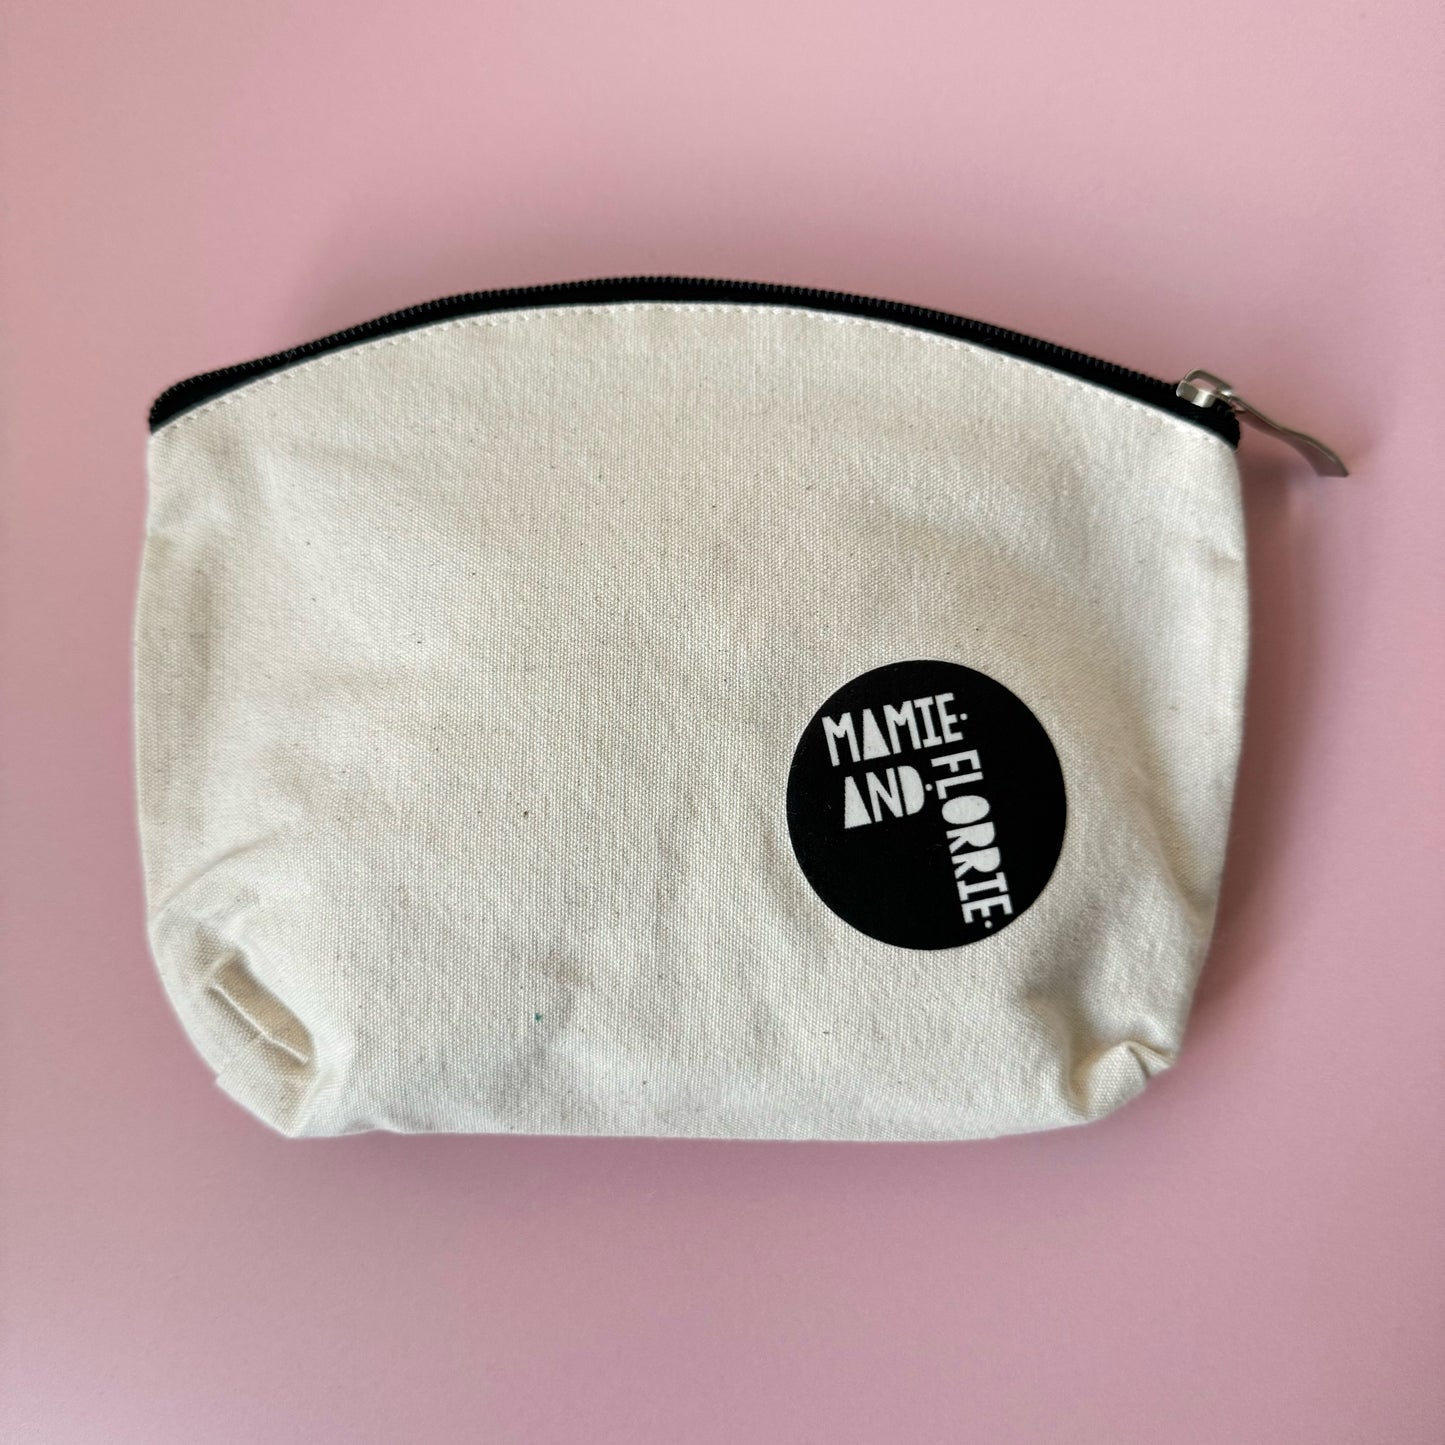 Mamie and Florrie Notions Pouch